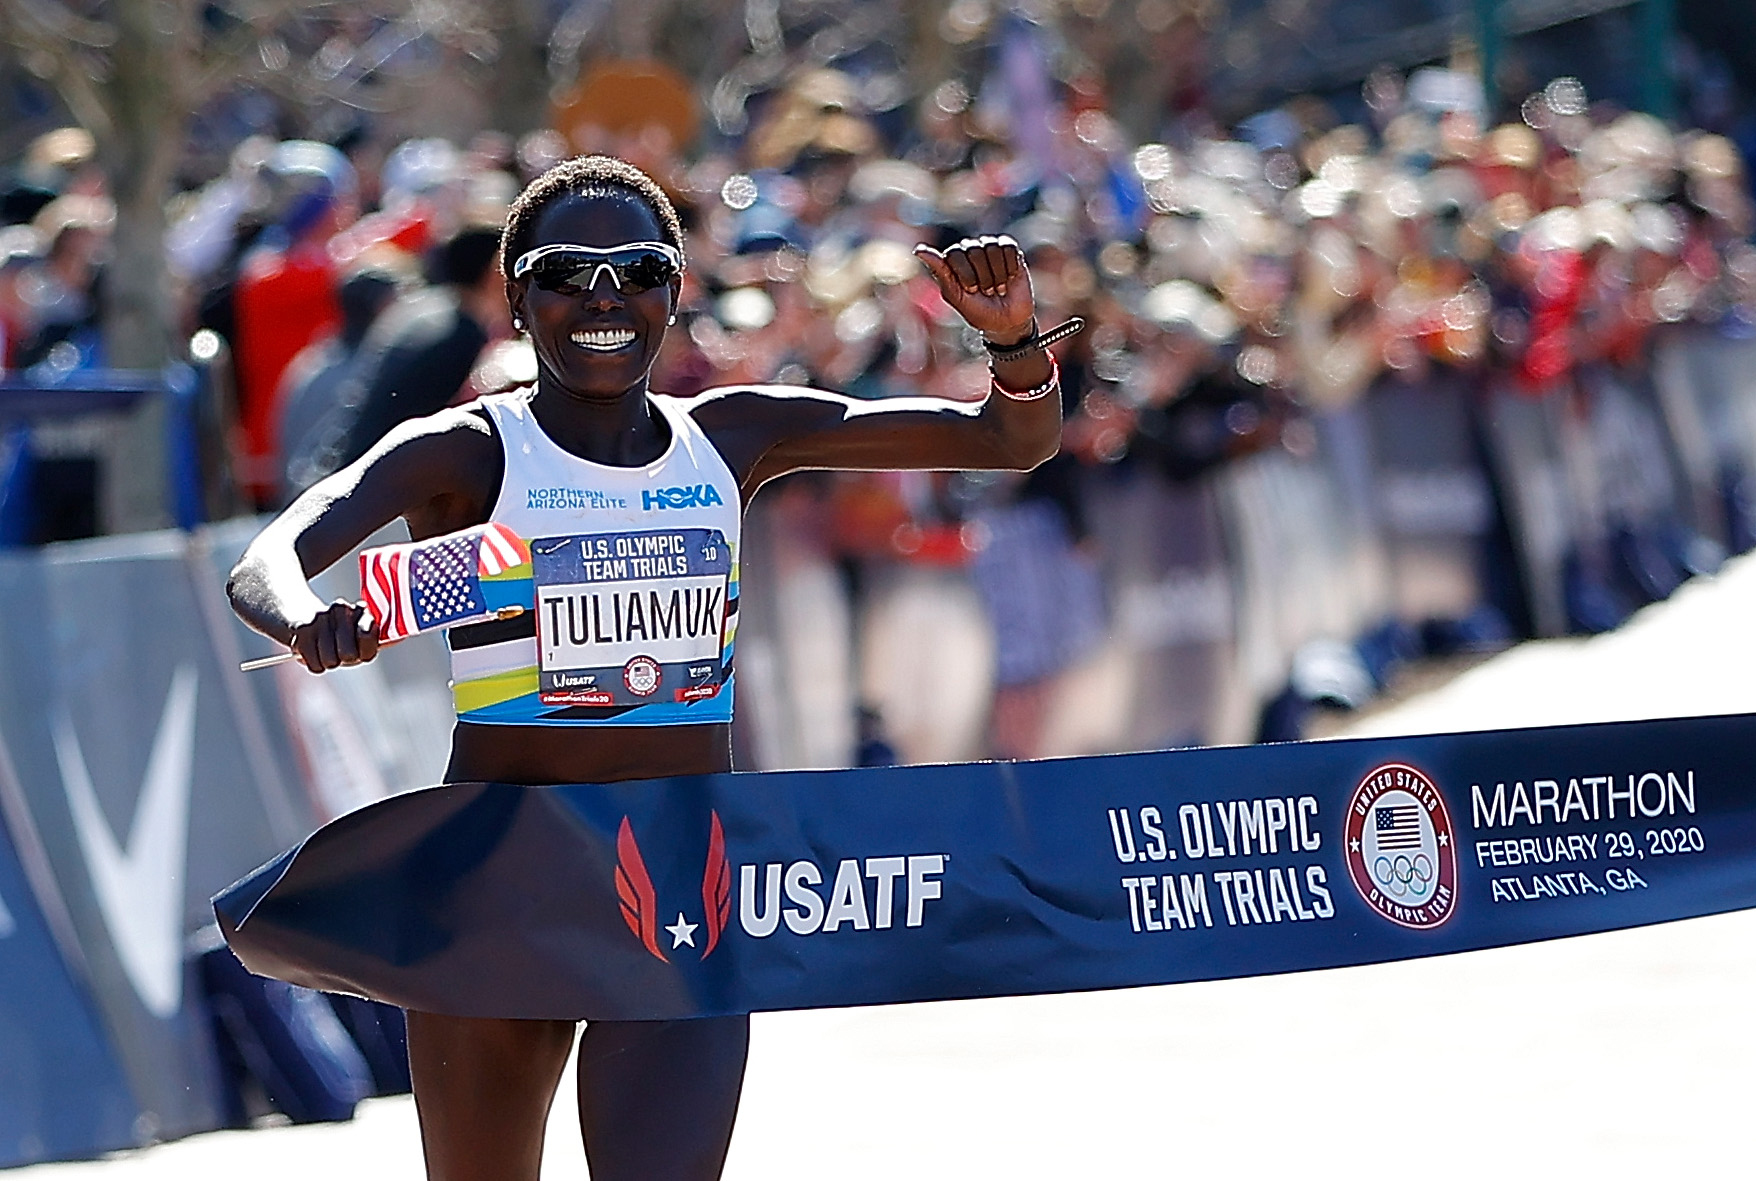 PHOTO: Aliphine Tuliamuk reacts as she crosses the finish line to win the Women's U.S. Olympic marathon team trials on Feb. 29, 2020 in Atlanta.